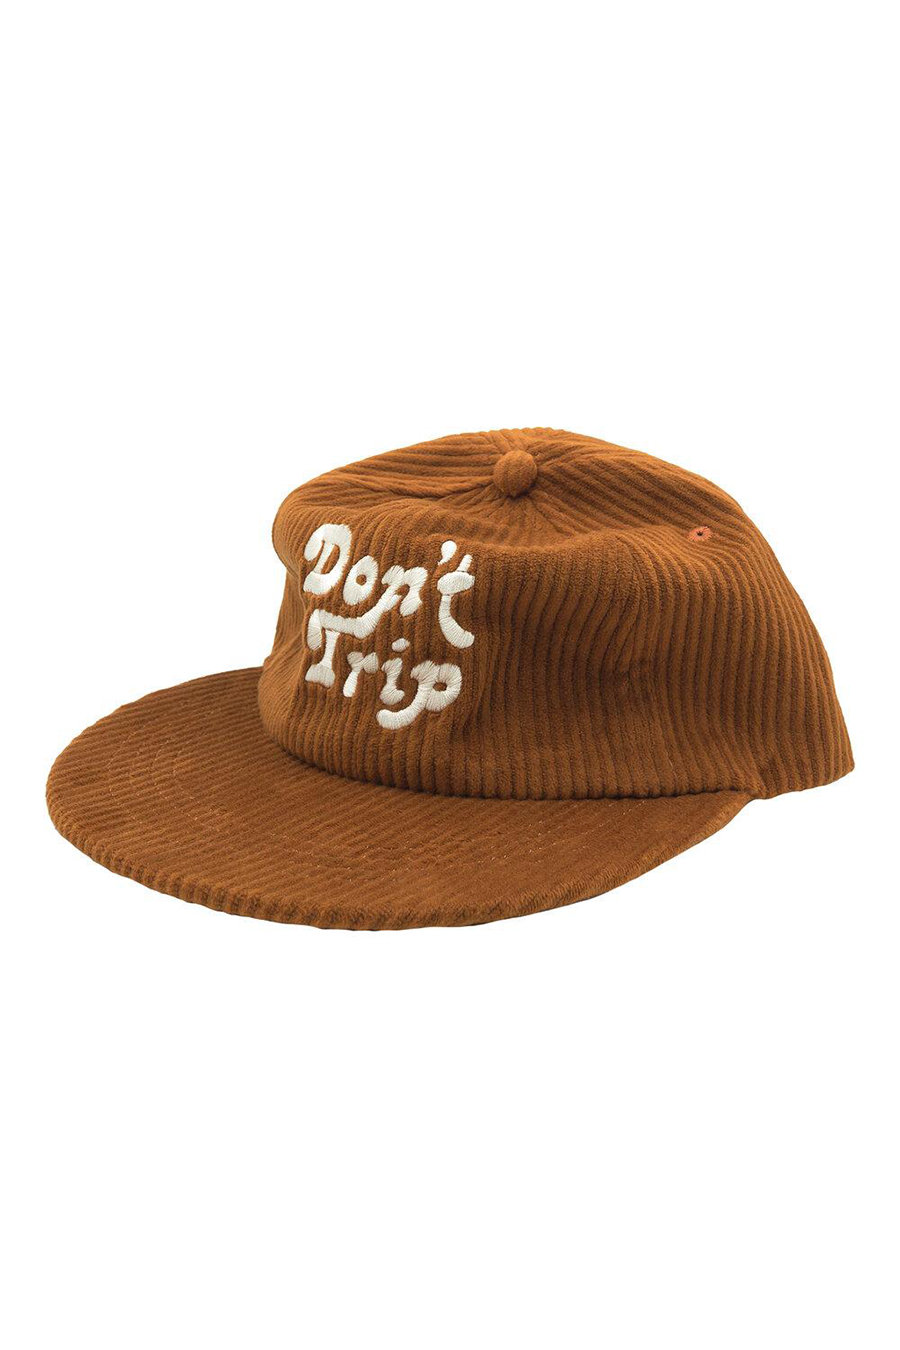 Don't Trip Fat Corduroy Hat | Rust - Main Image Number 1 of 2